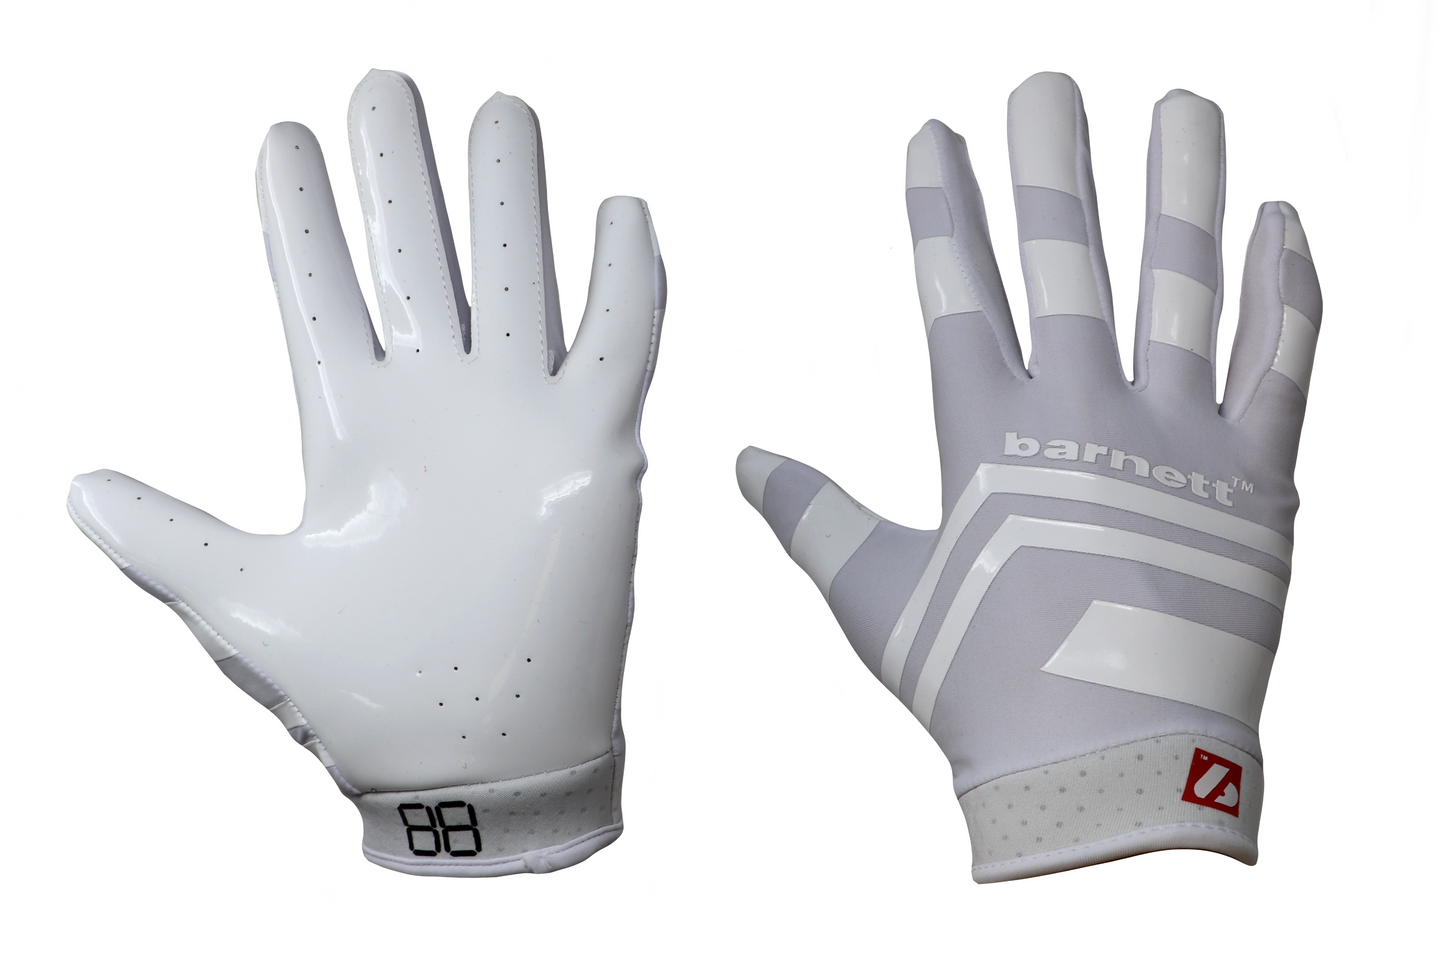 FRG-03 The best receiver football gloves, RE,DB,RB, White